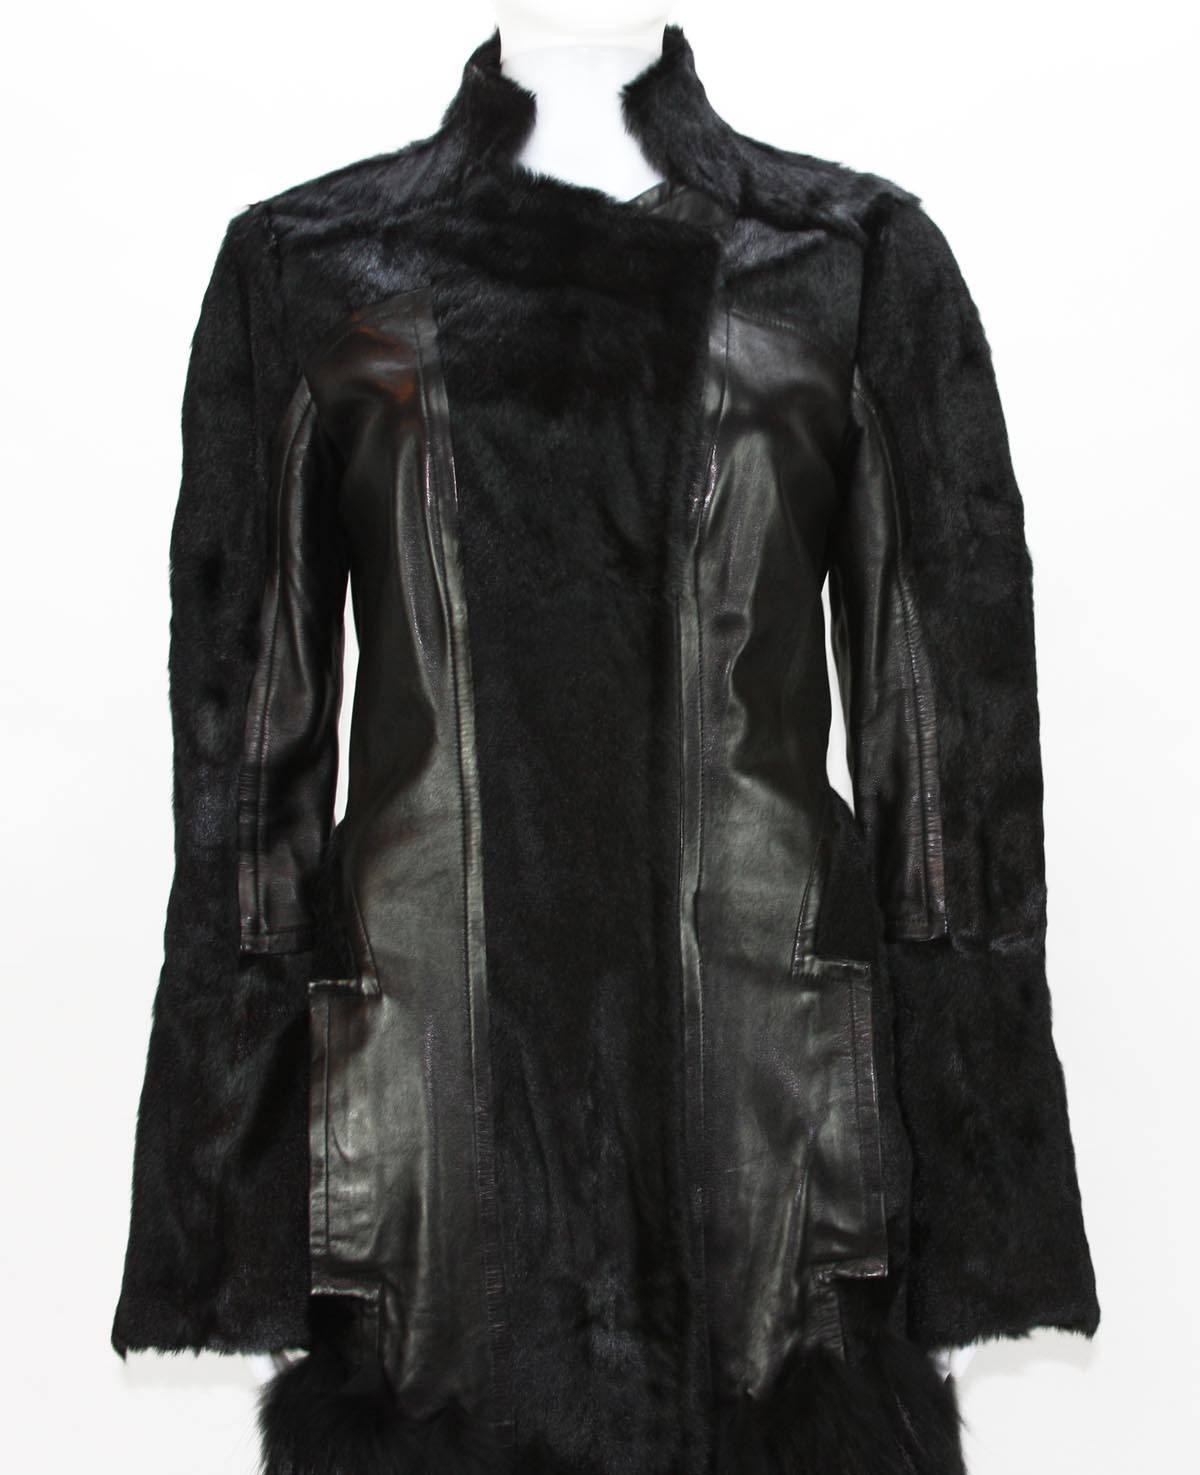 Women's RARE TOM FORD for GUCCI F/W 2004 FOX GOAT LEATHER BLACK COAT